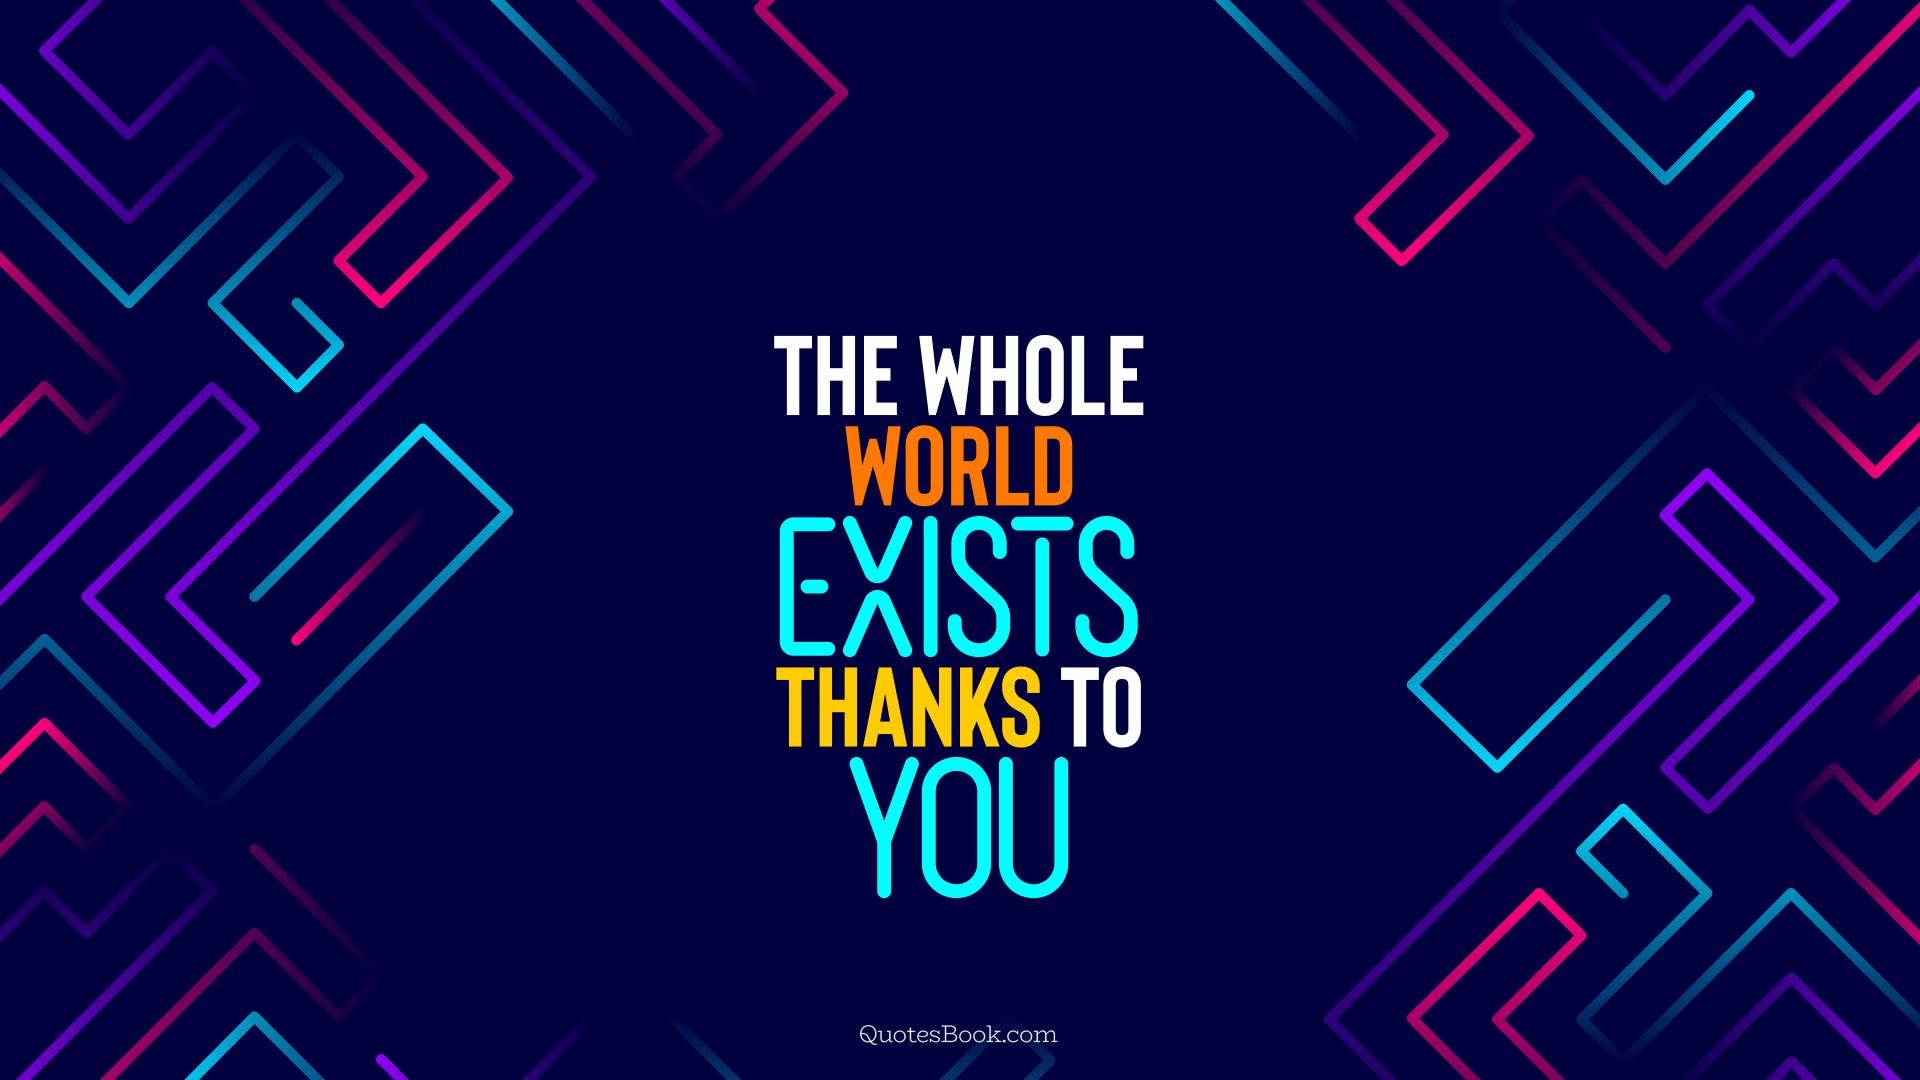 The whole world exists thanks to you. - Quote by QuotesBook